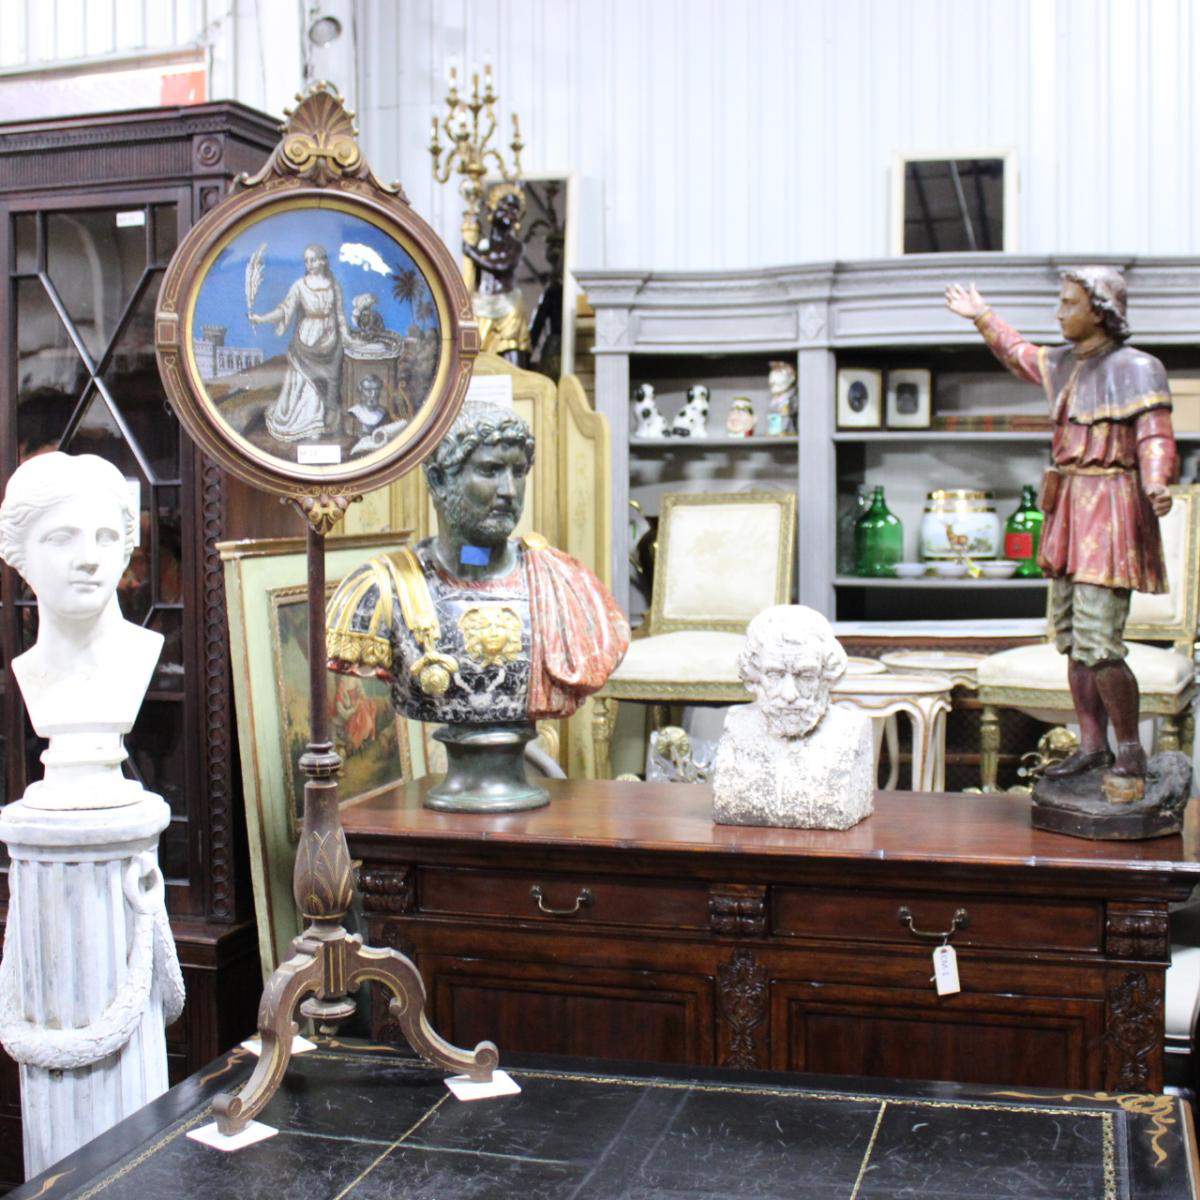 Estate sale offers items from Carl Moores estate, among others